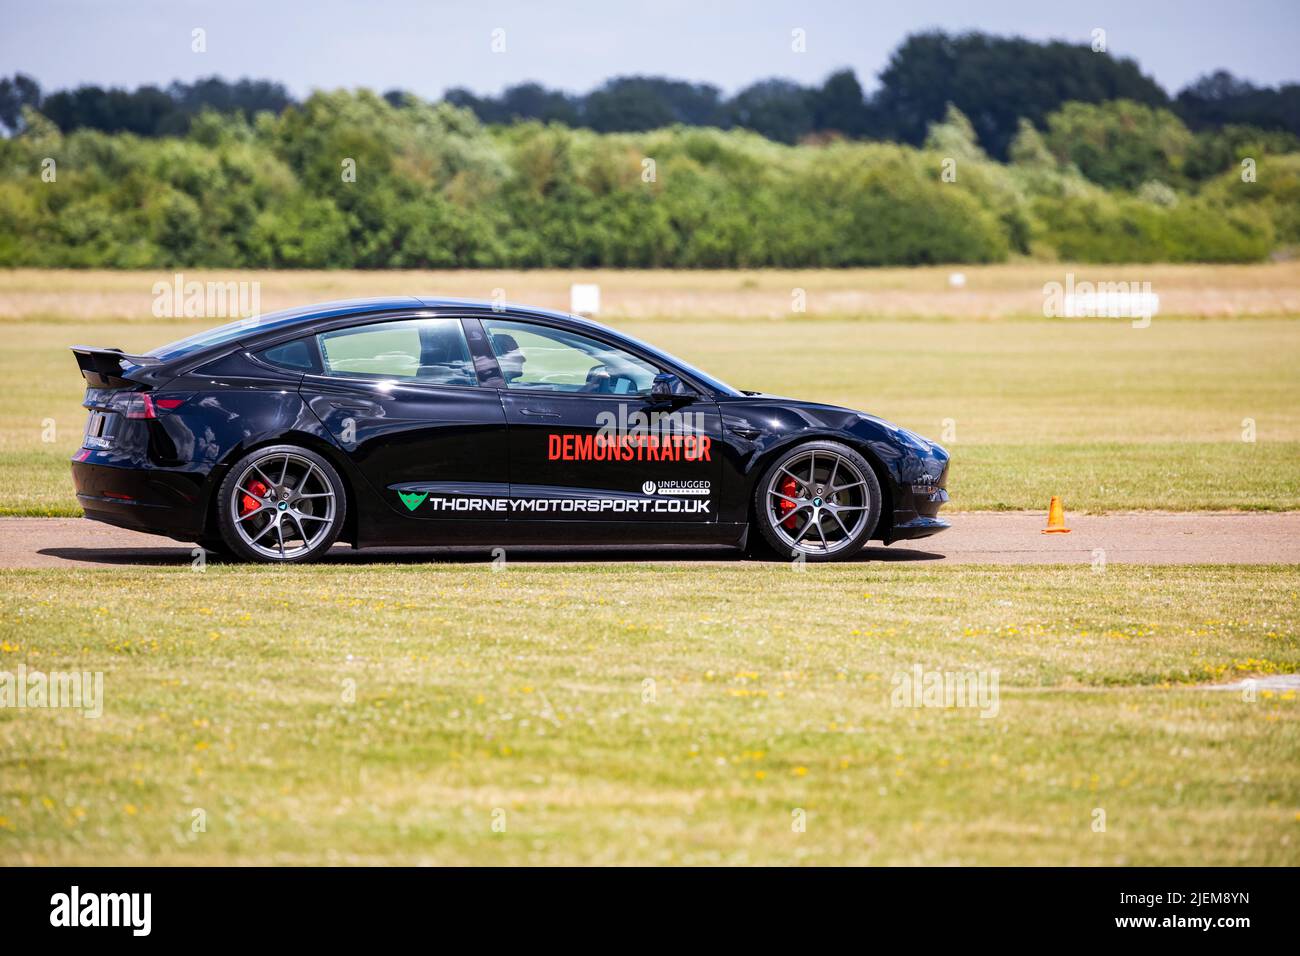 A Tesla Demonstrator car on the track at Bicester Aerodrome Stock Photo